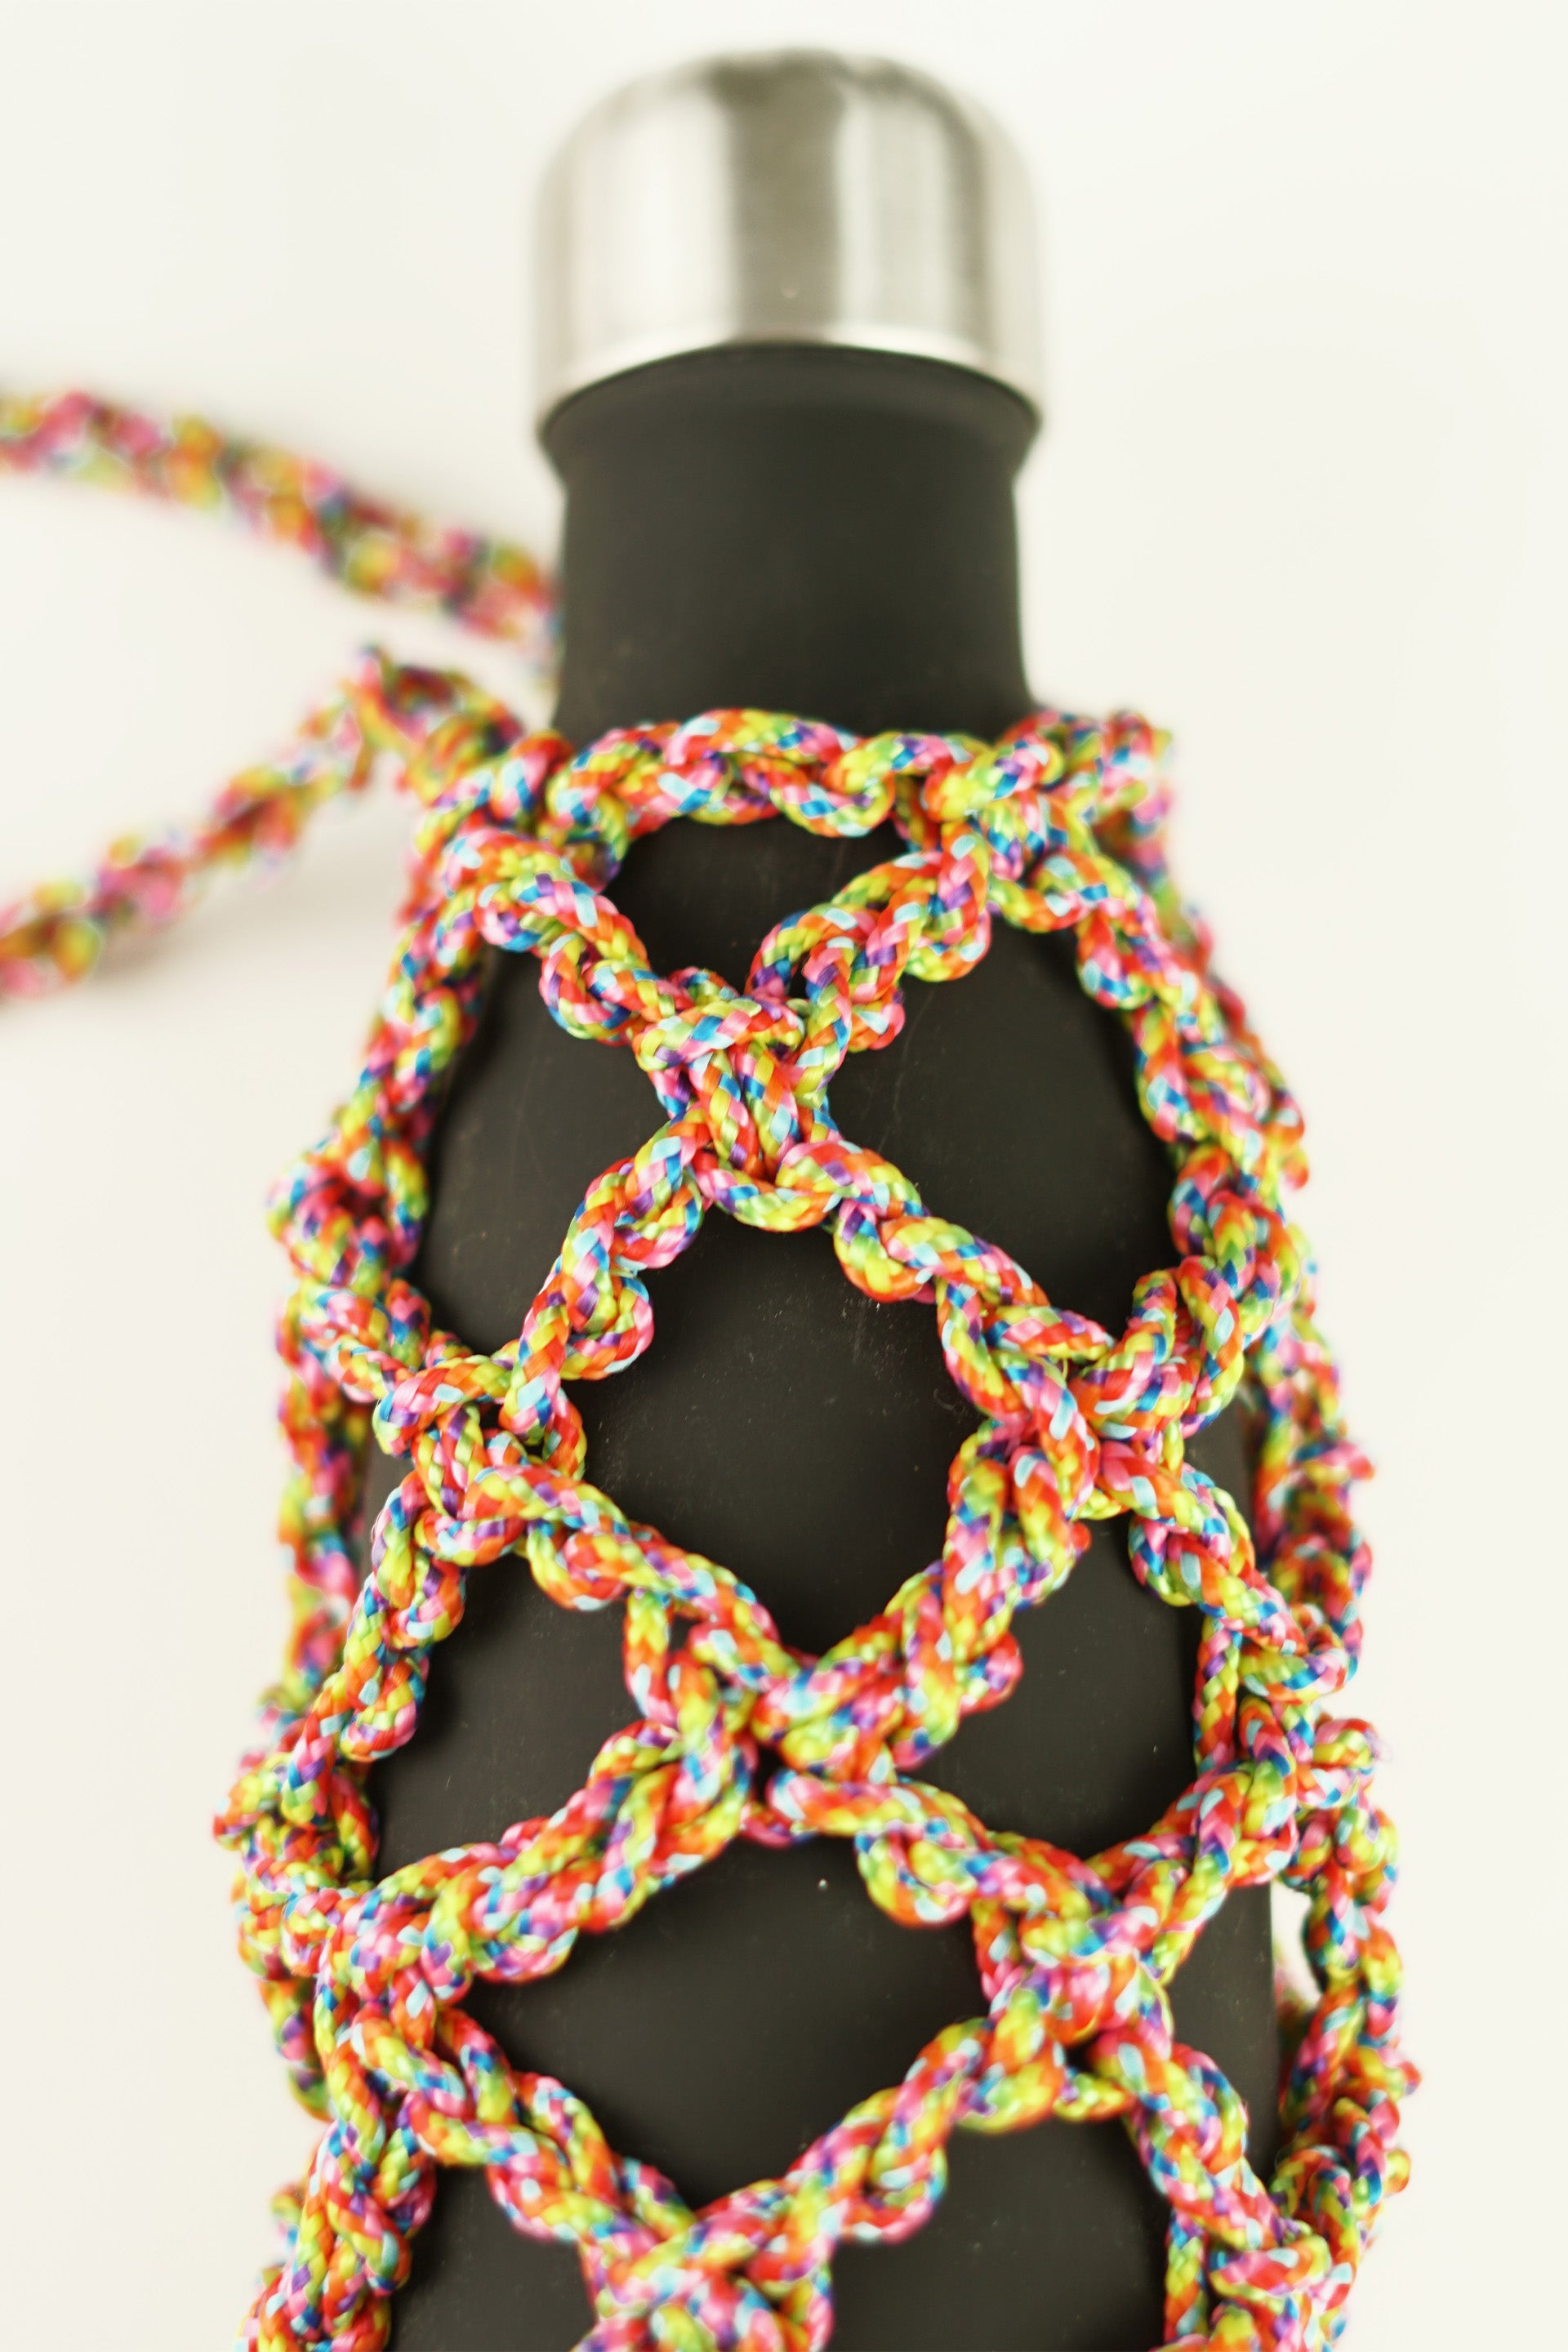 Multicolor water porter made of paracord rope